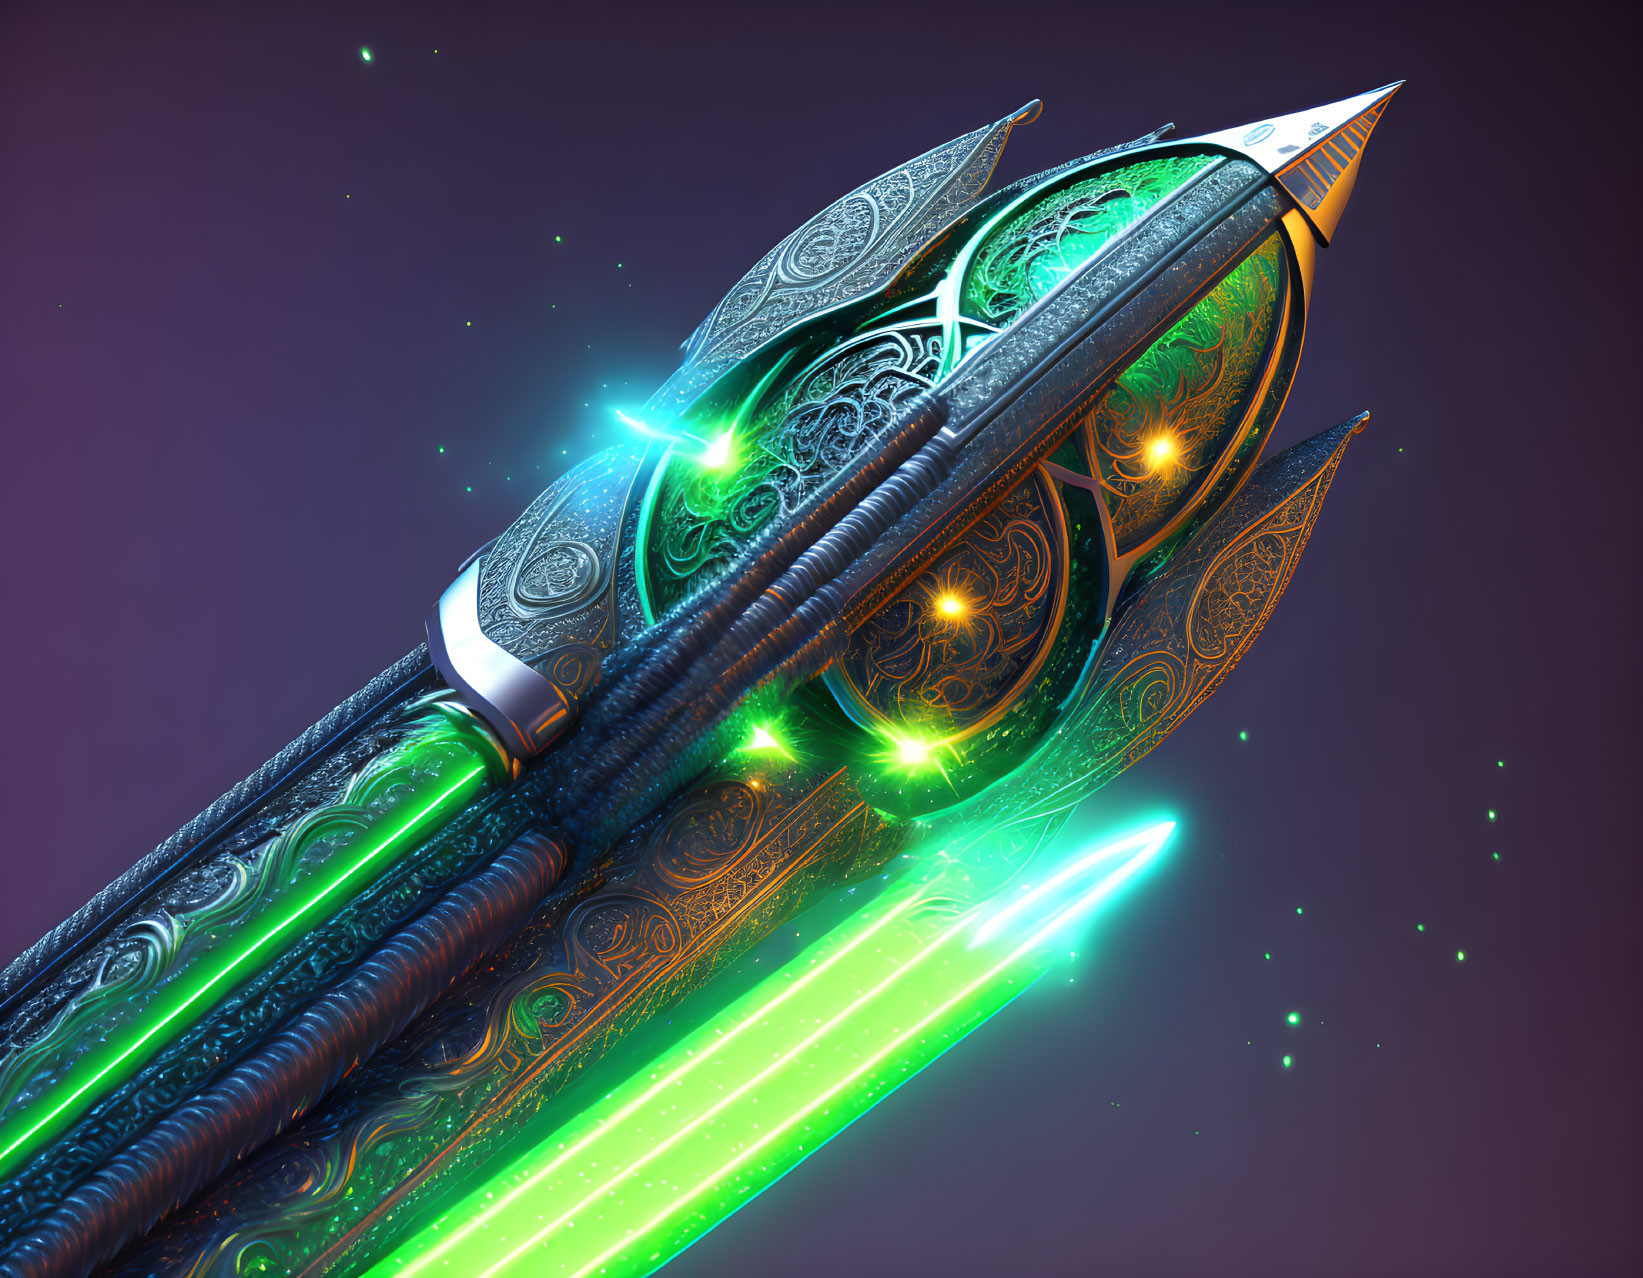 Futuristic ornate spaceship with green glowing details in starry space